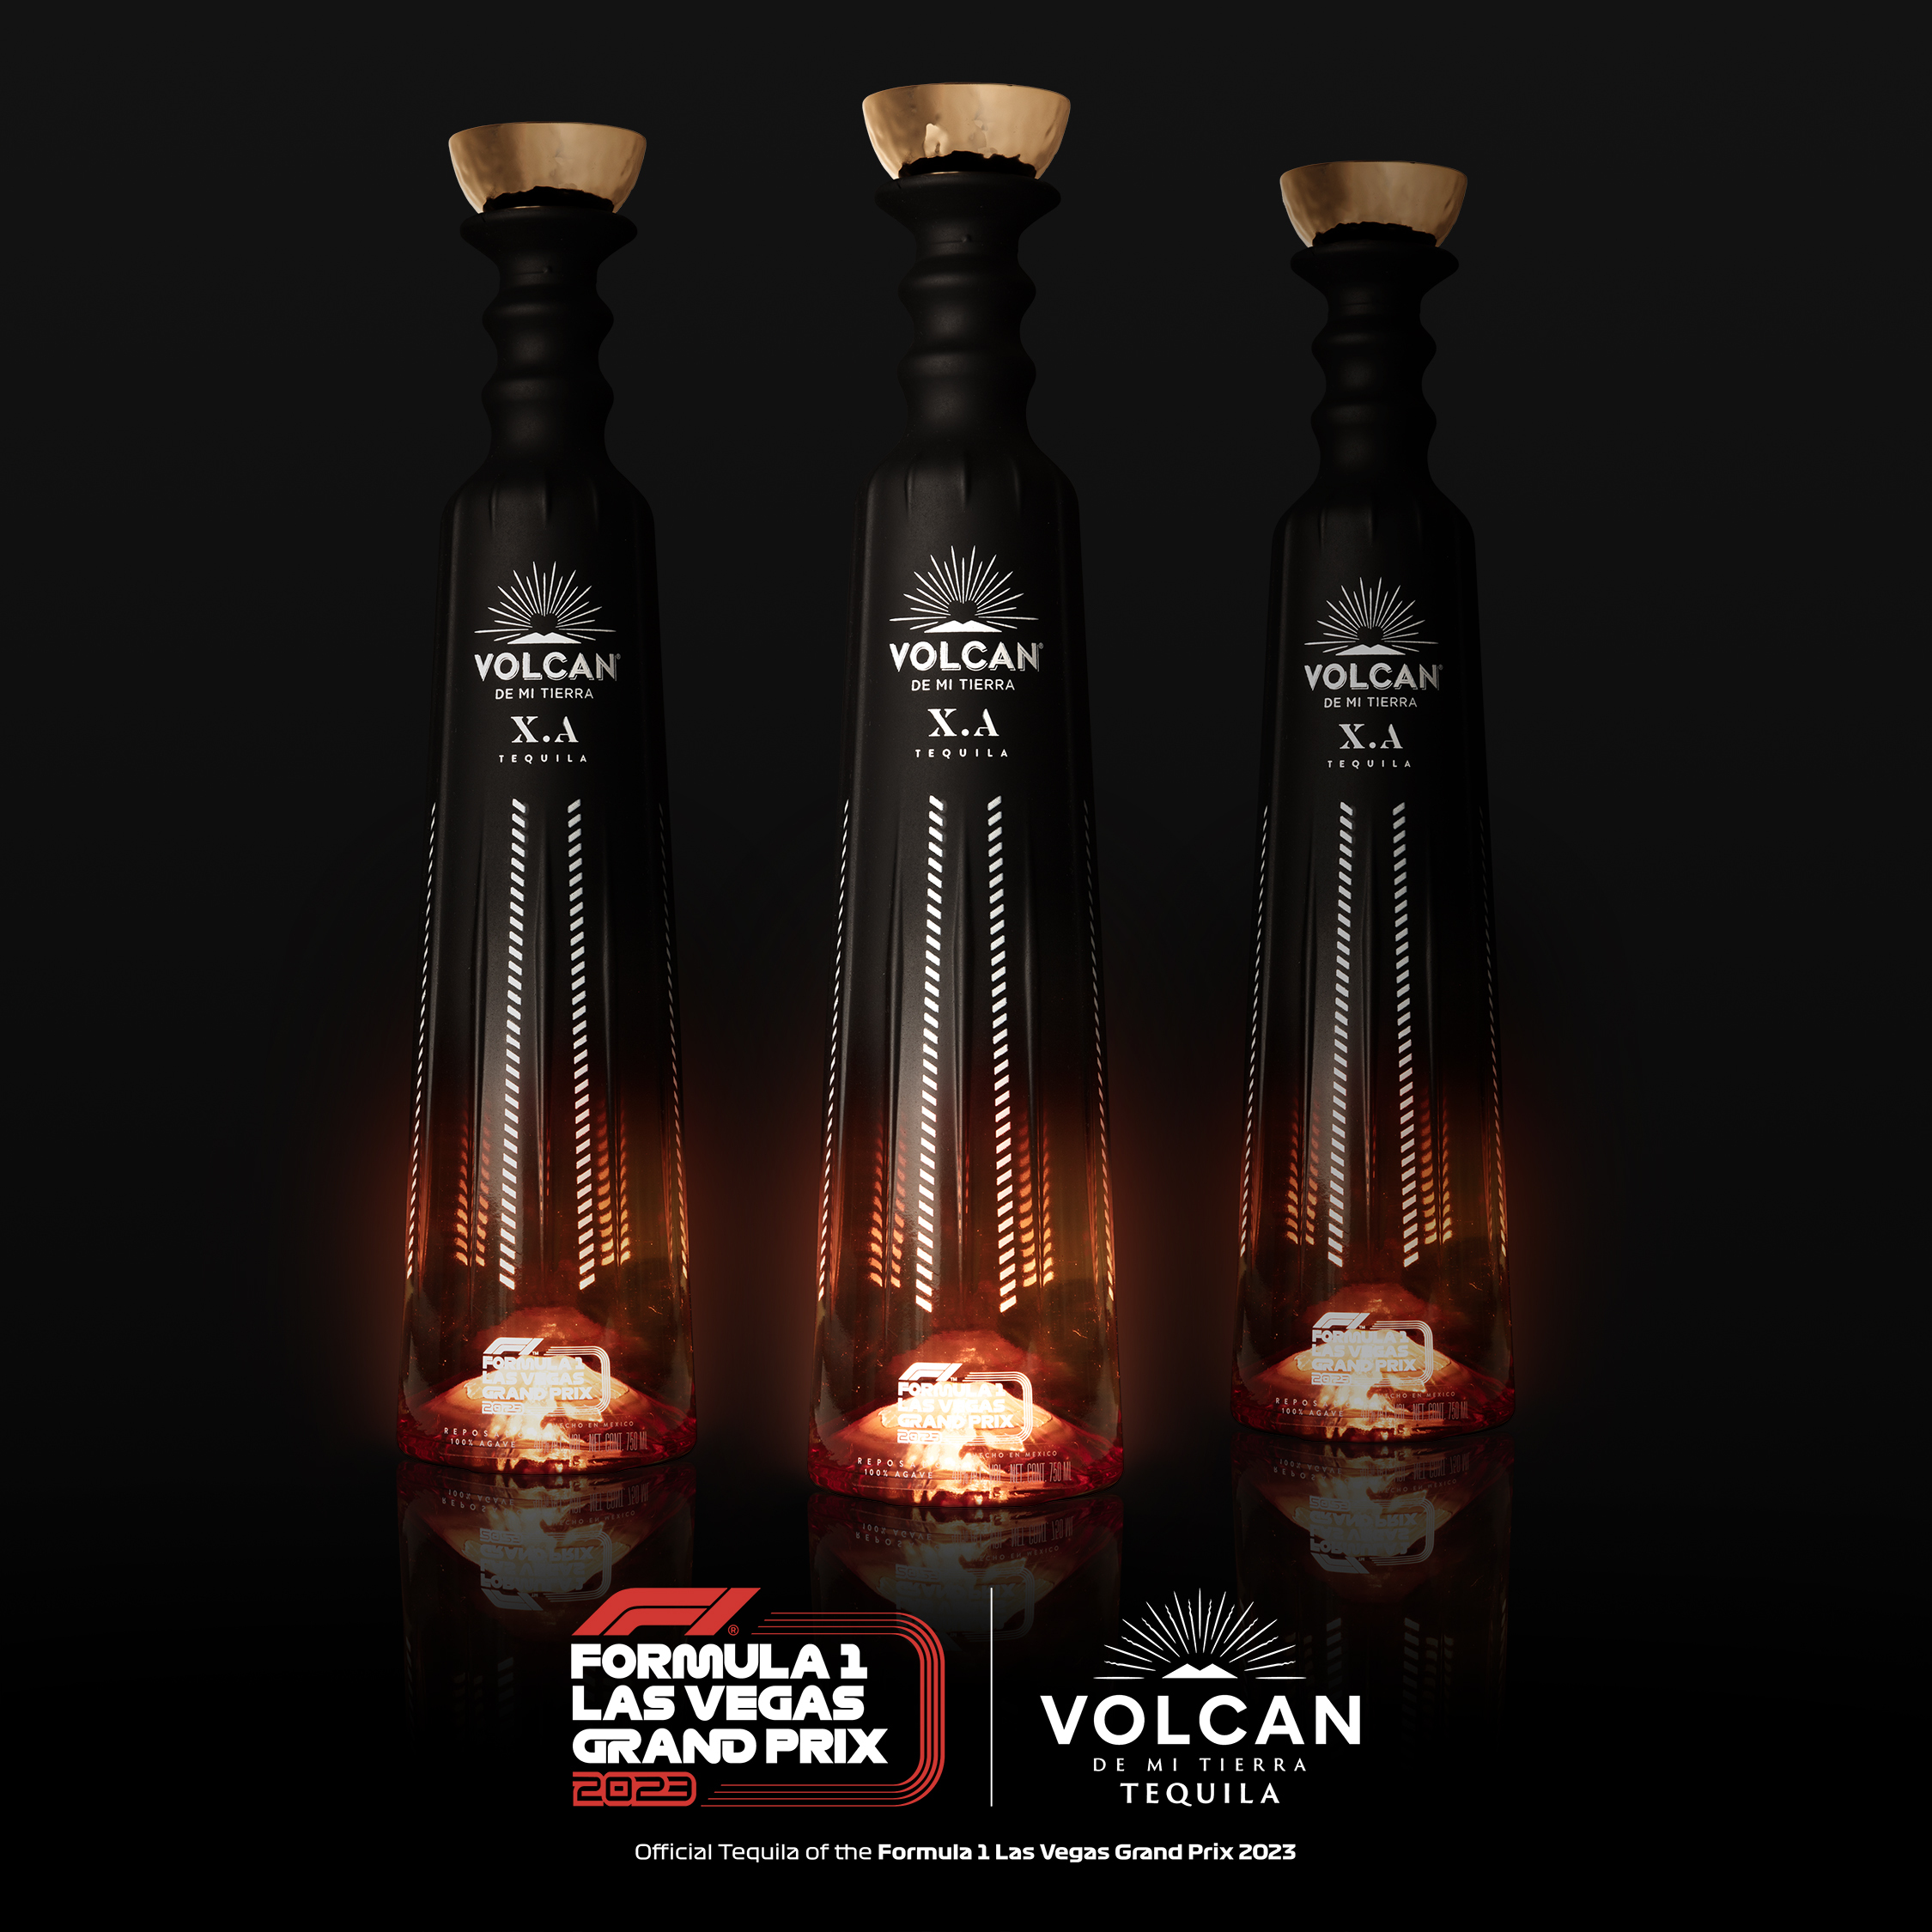 F1 Las Vegas on X: The #LasVegasGP is thrilled to announce an exciting  partnership with Volcan de mi Tierra, the official tequila of the inaugural  race. To celebrate, 3,800 limited-edition Volcan X.A